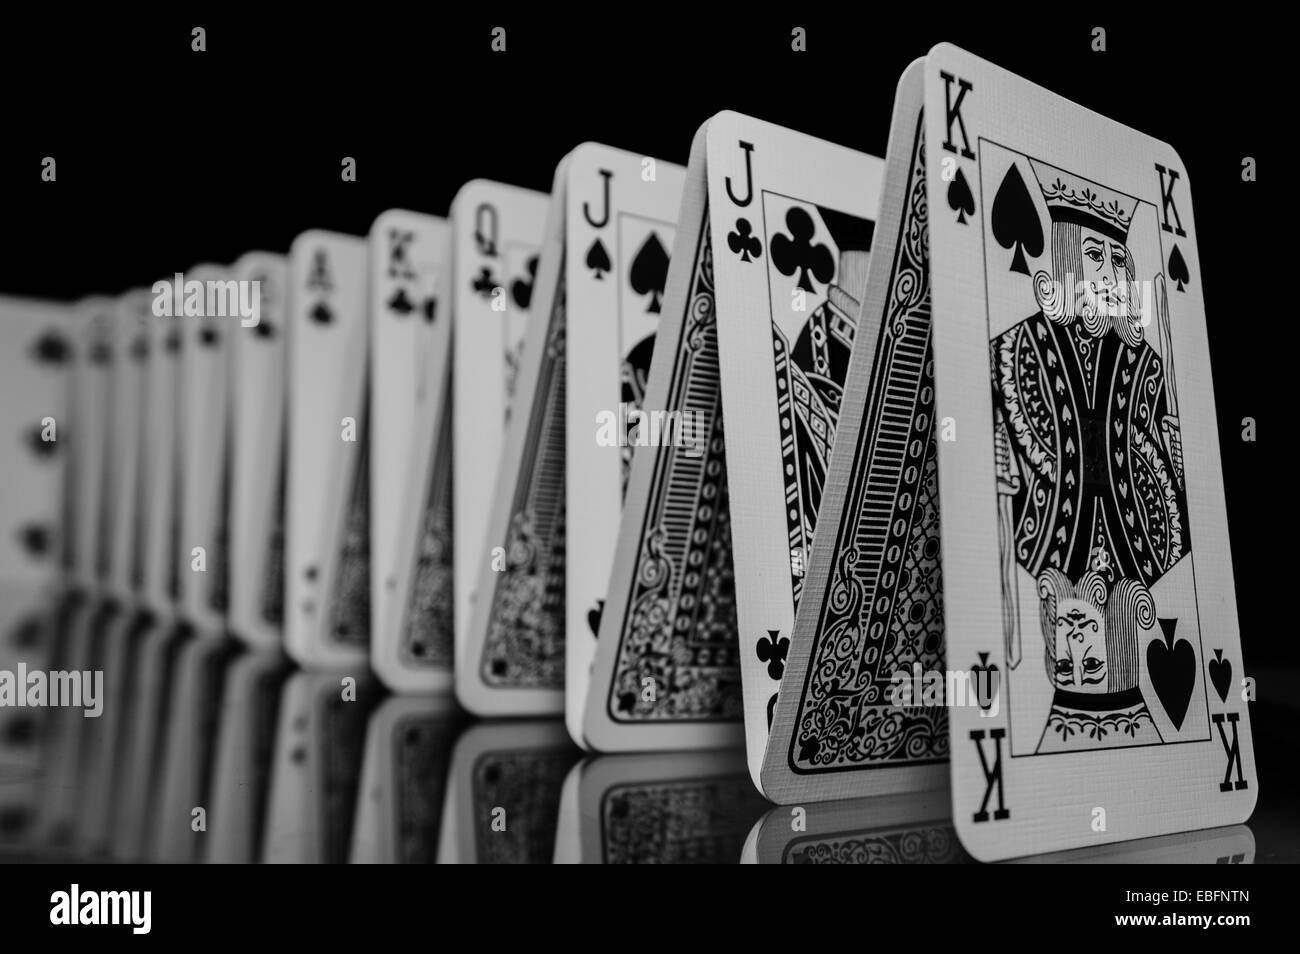 A set of playing cards in formation, reflecting onto the table below. Stock Photo